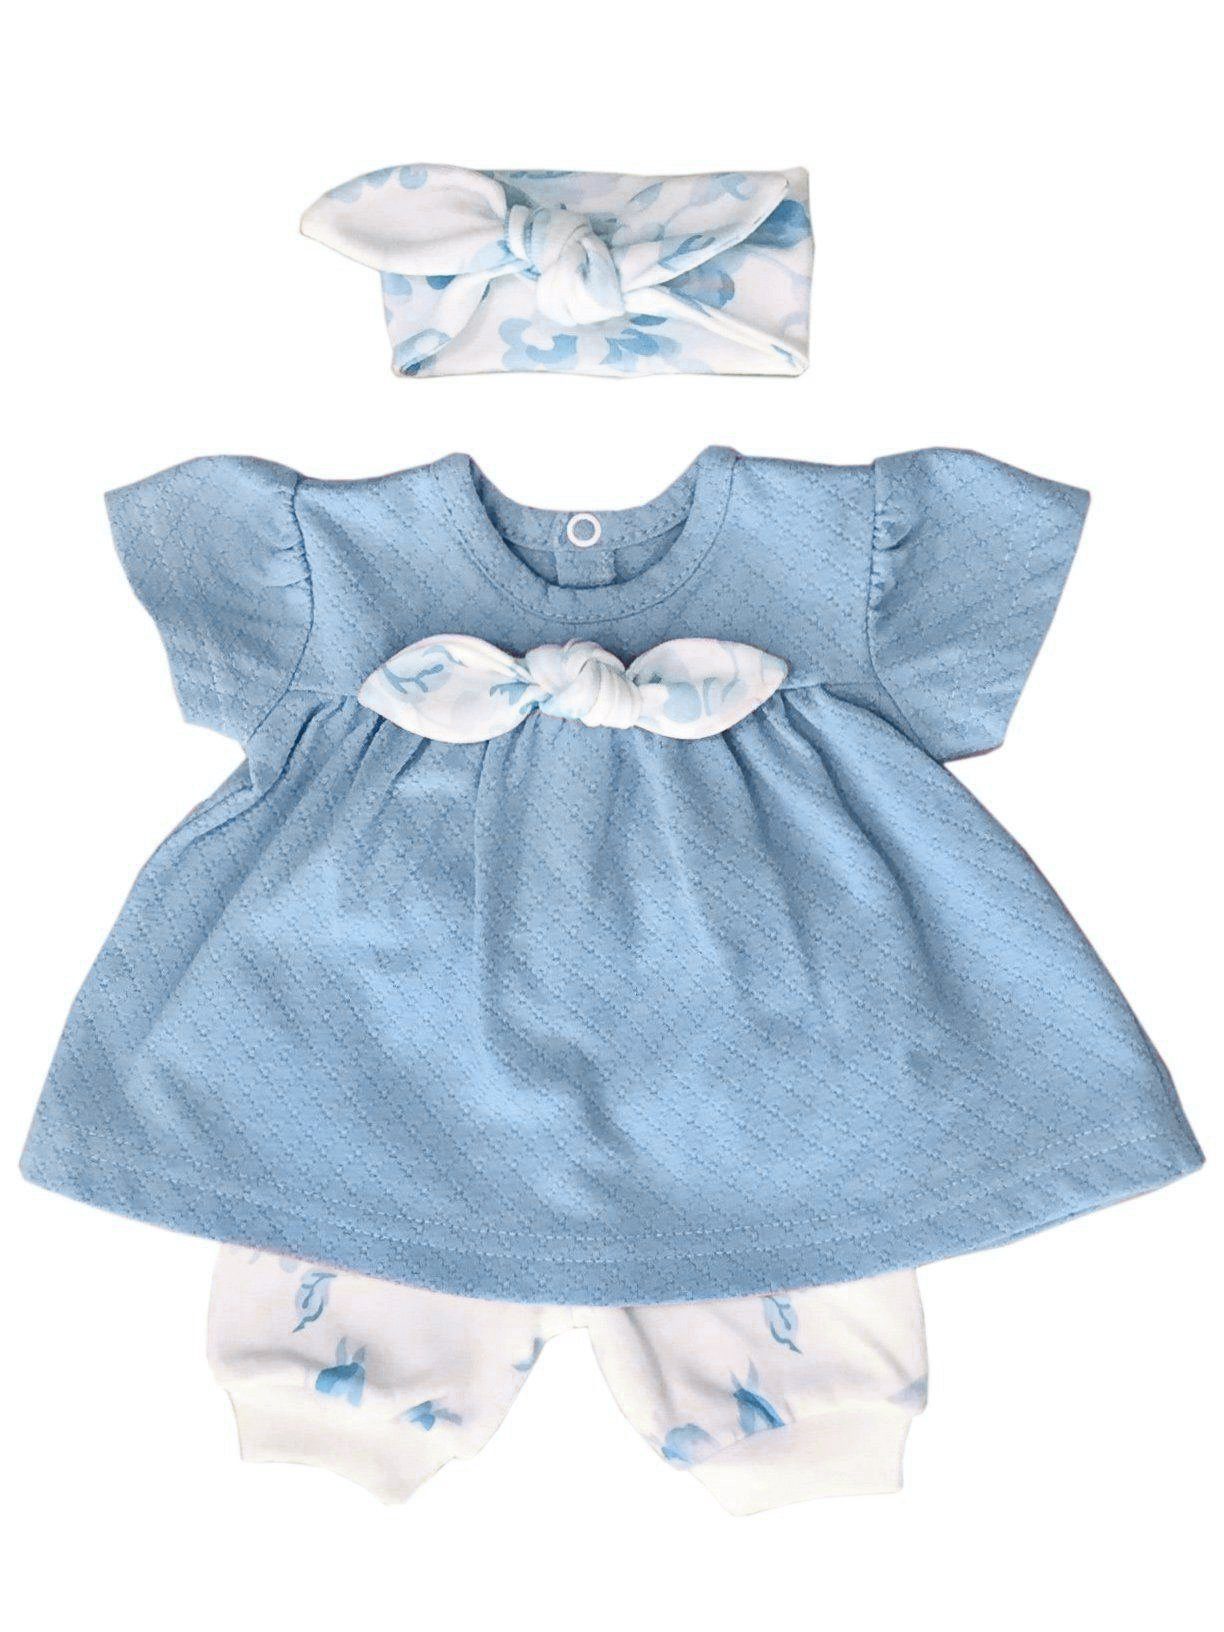 Cornflower Blue Floral Dress, Trousers & Headband Set Outift Itty Bitty Baby Clothing 